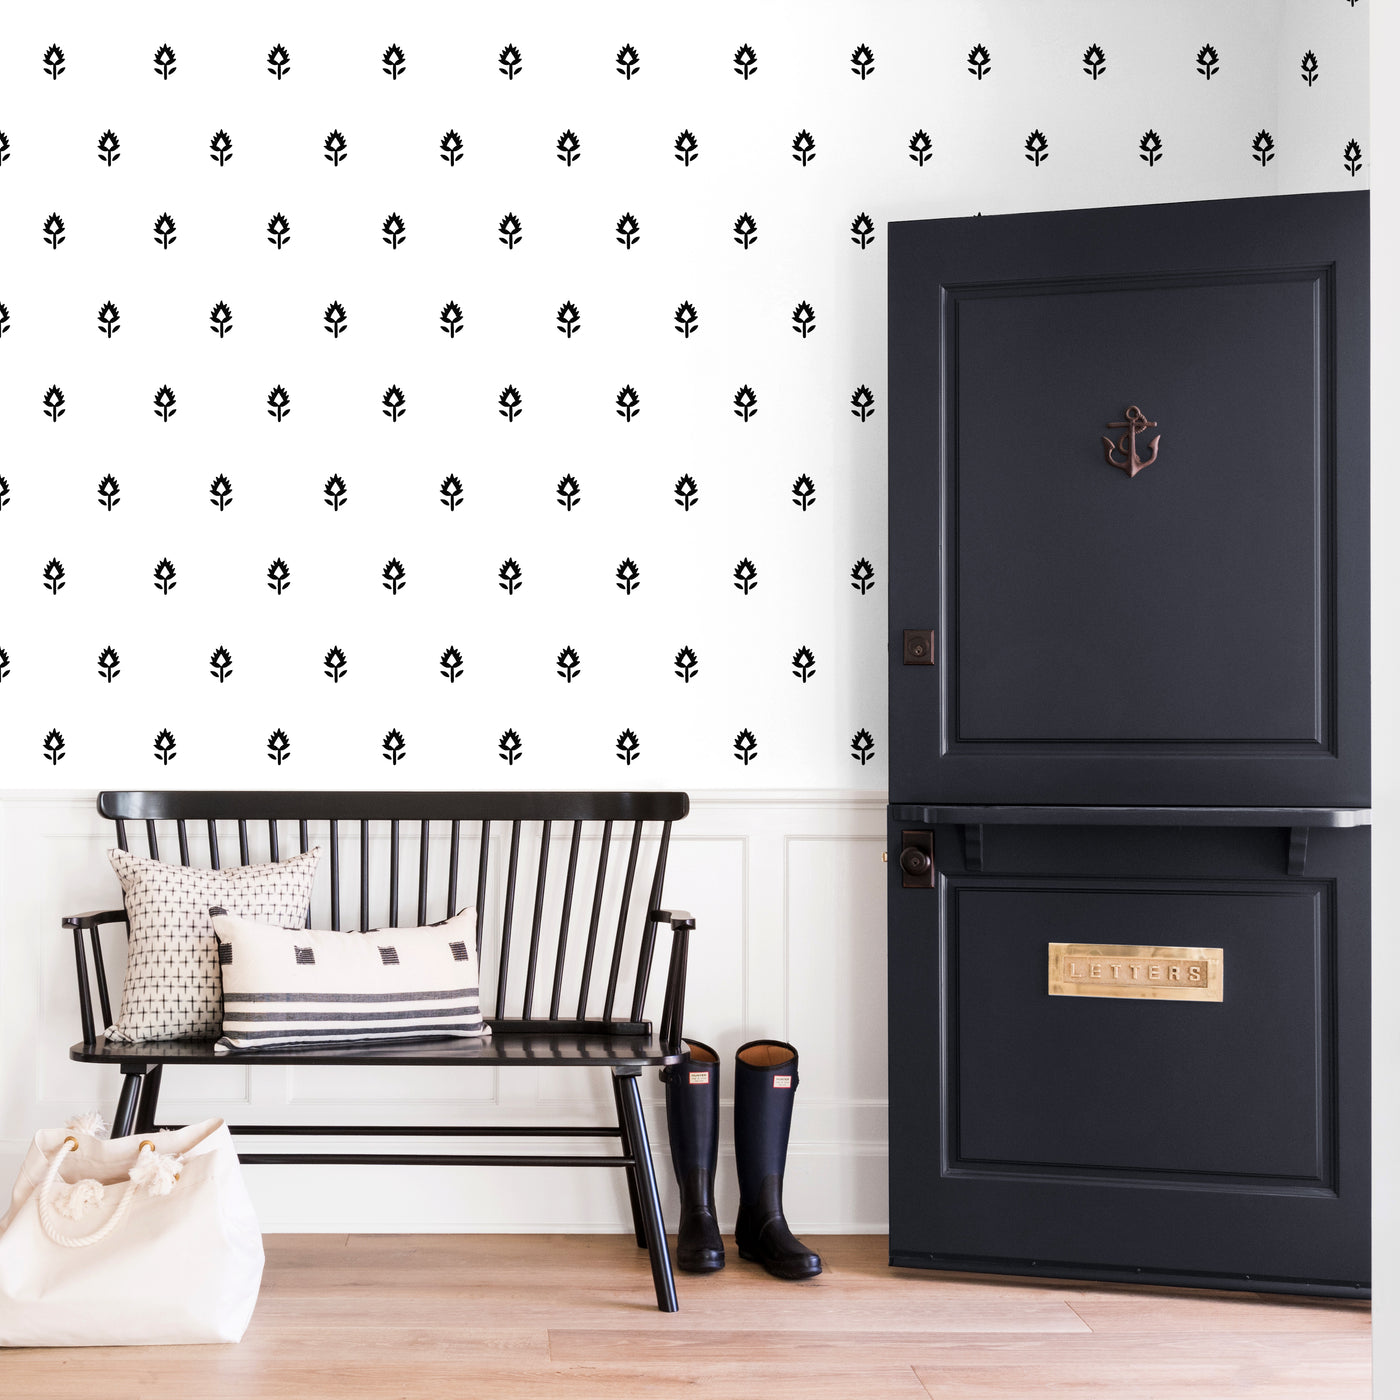 Removable vs. Traditional Wallpaper